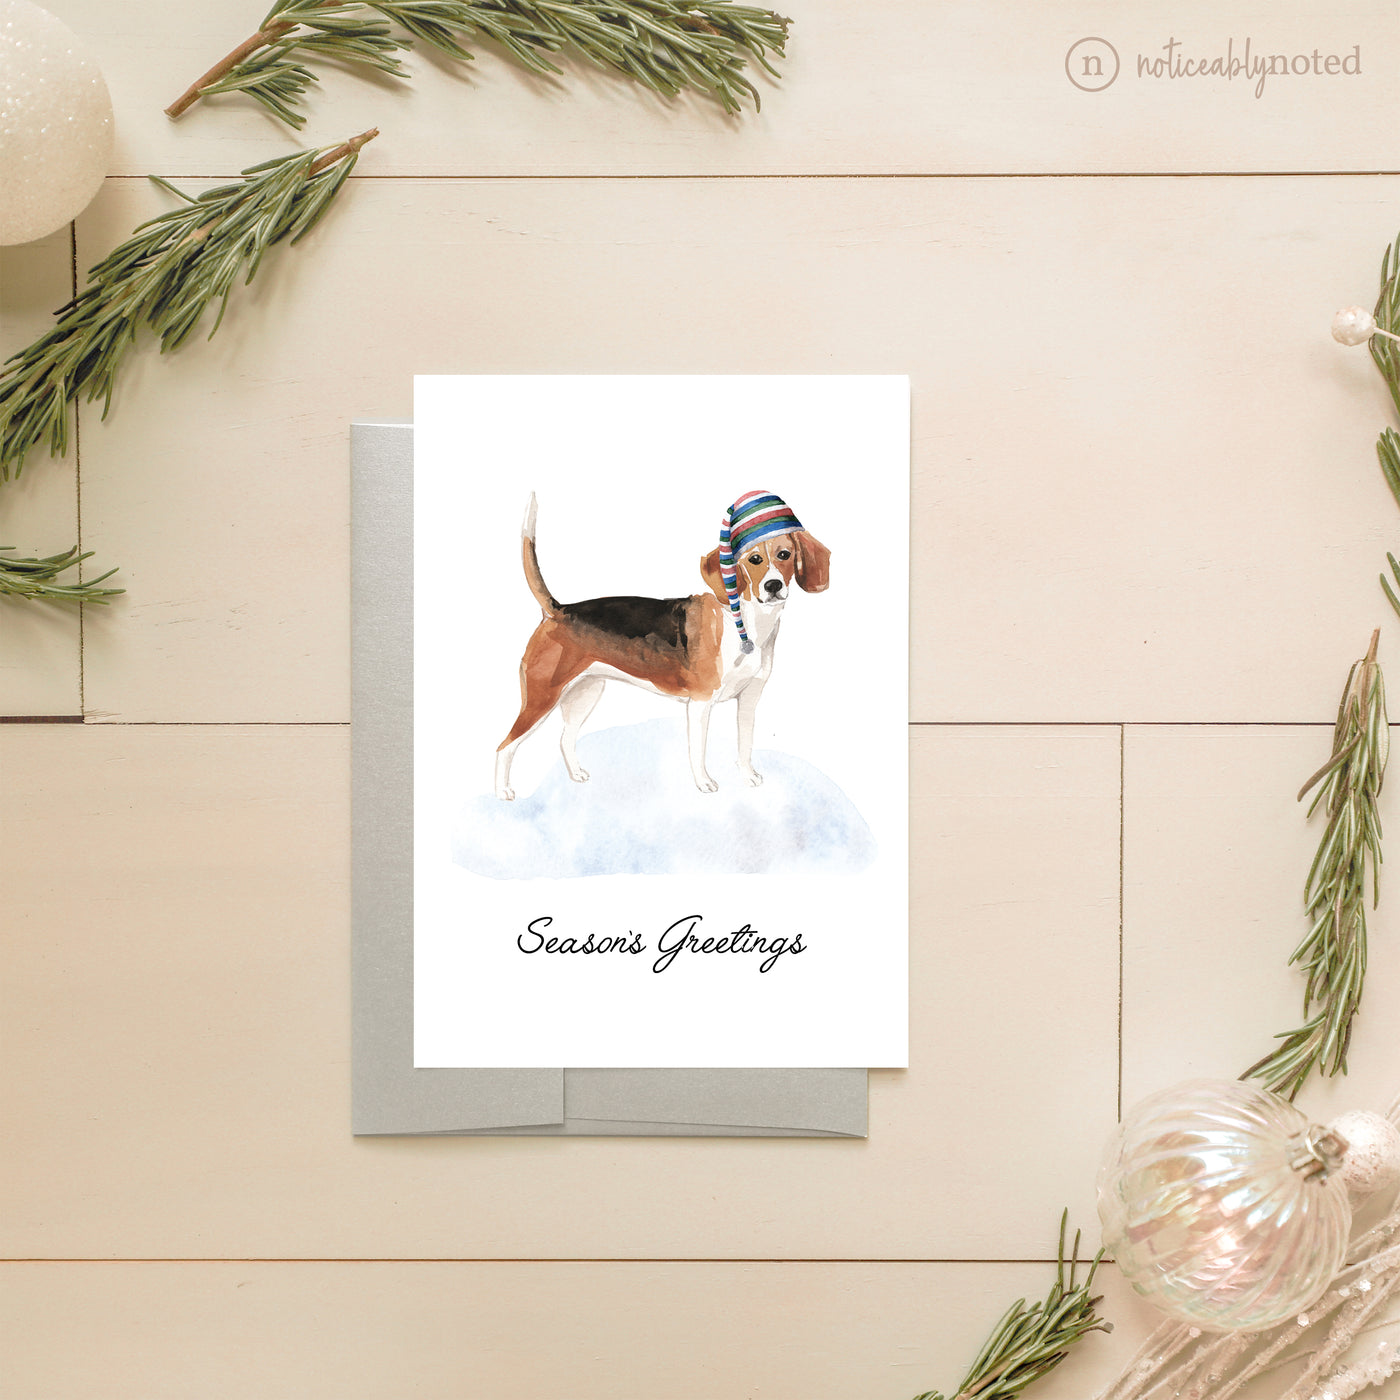 Beagle Dog Holiday Greeting Cards | Noticeably Noted